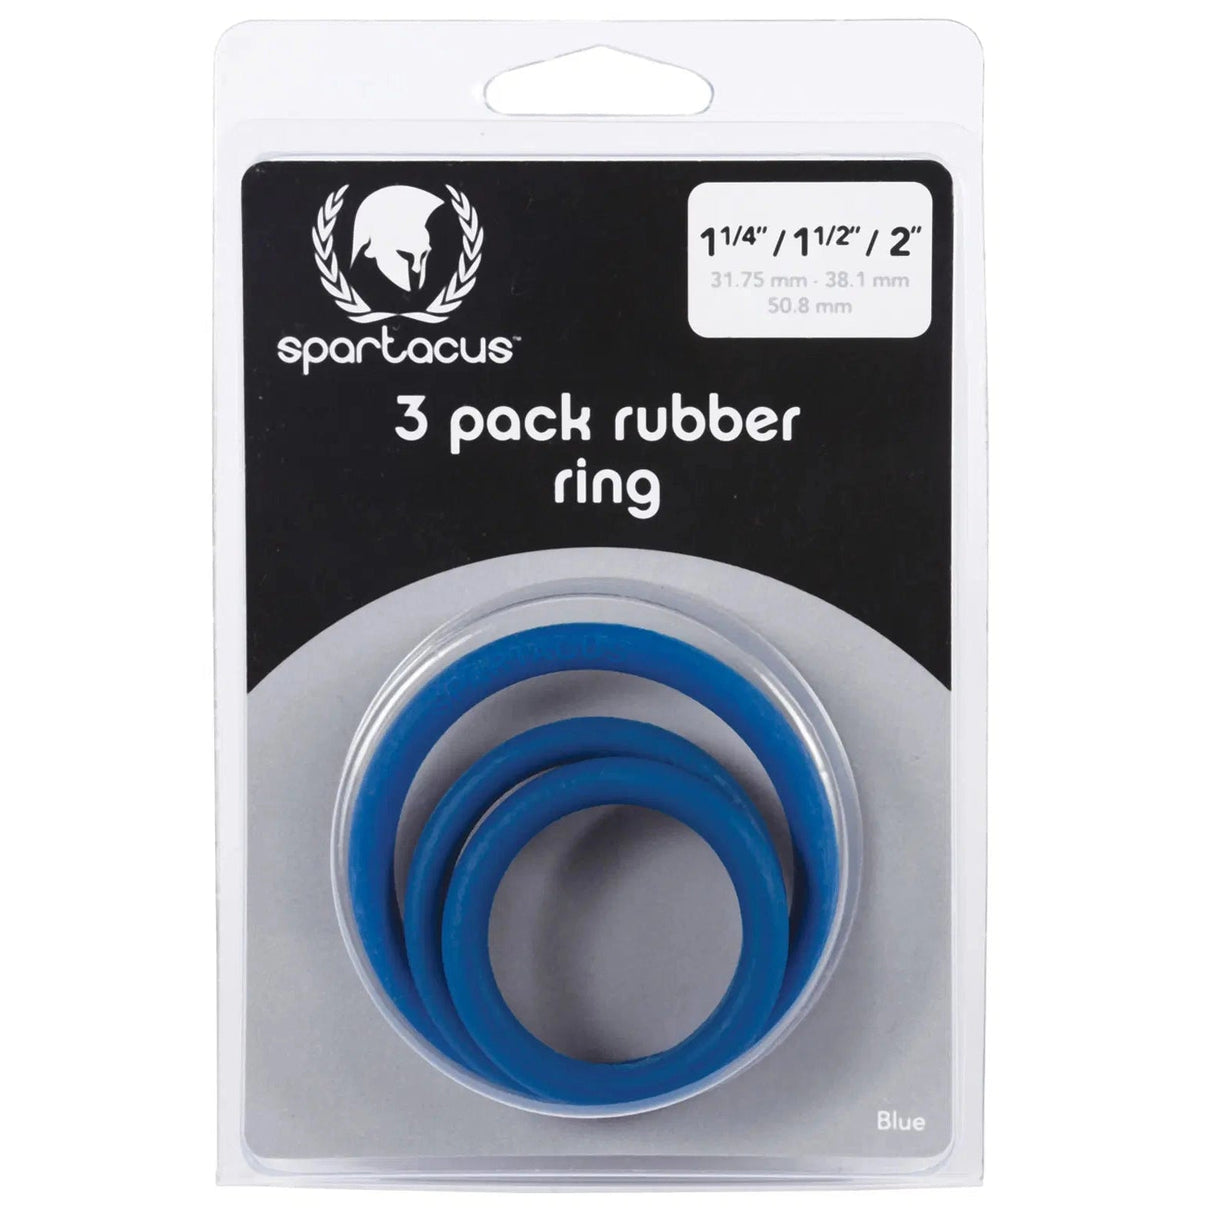 Spartacus Rubber Band Cock Ring Set